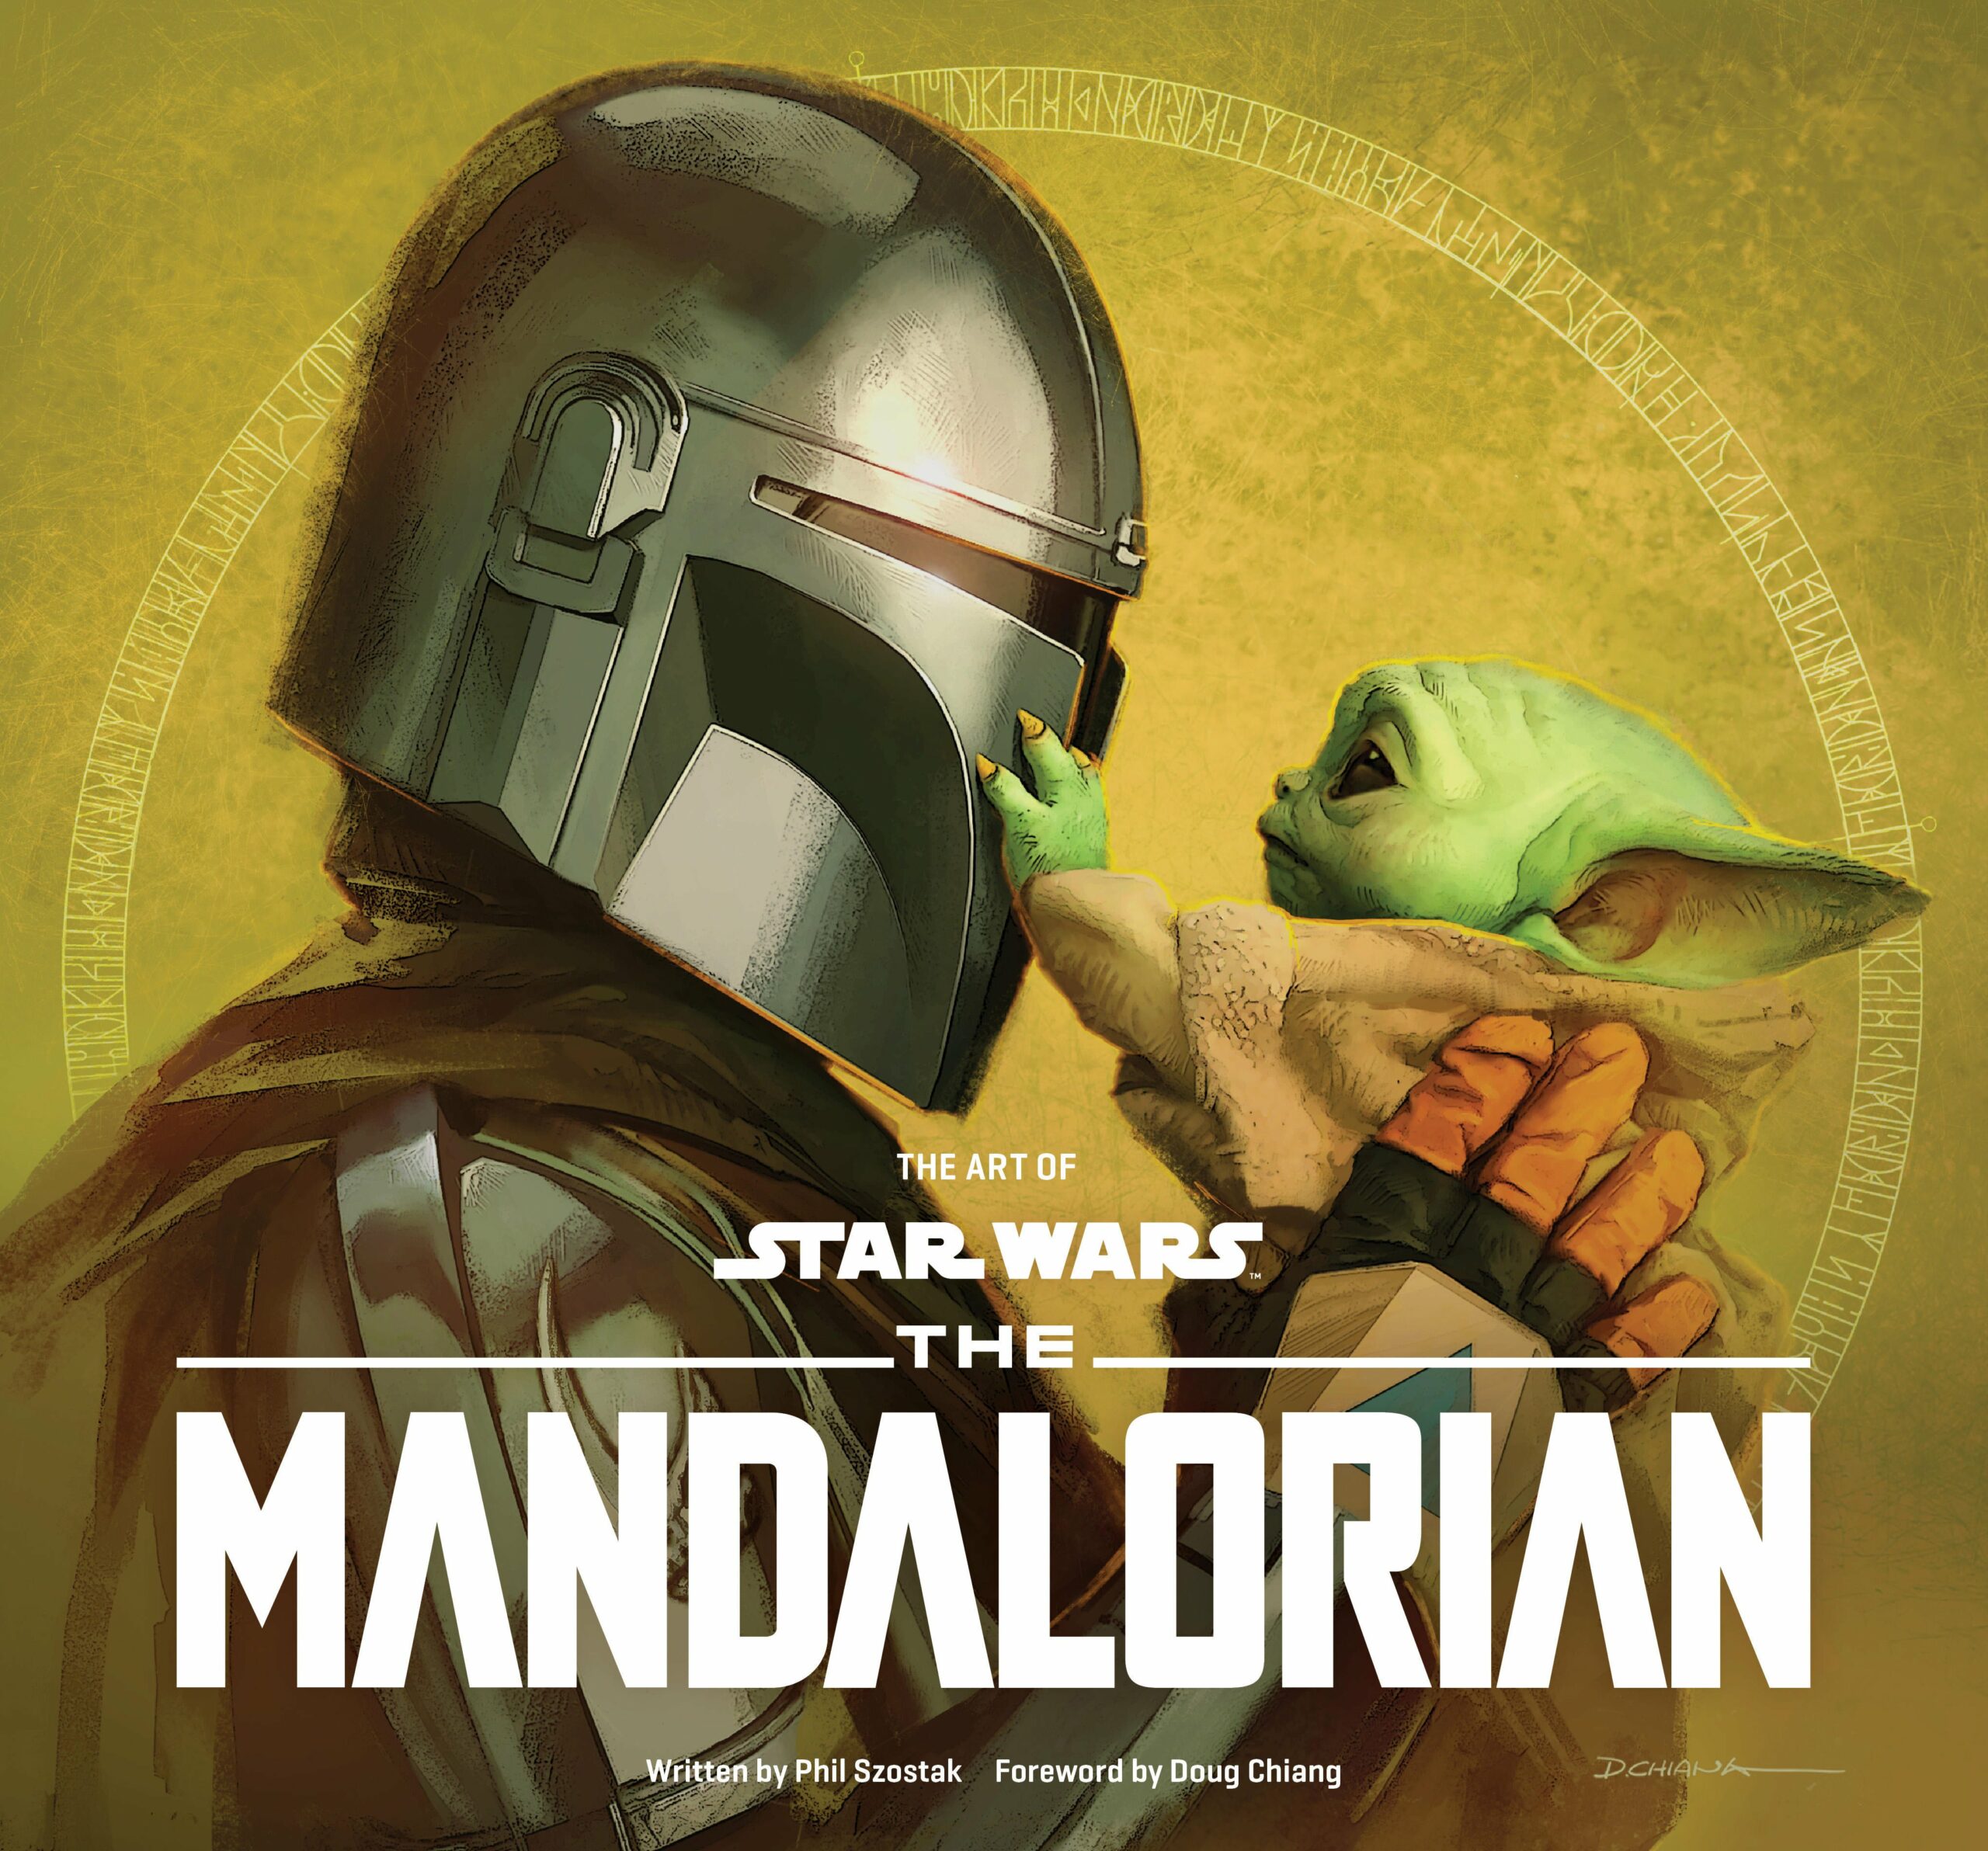 When Does The Mandalorian Take Place on the Star Wars Timeline?